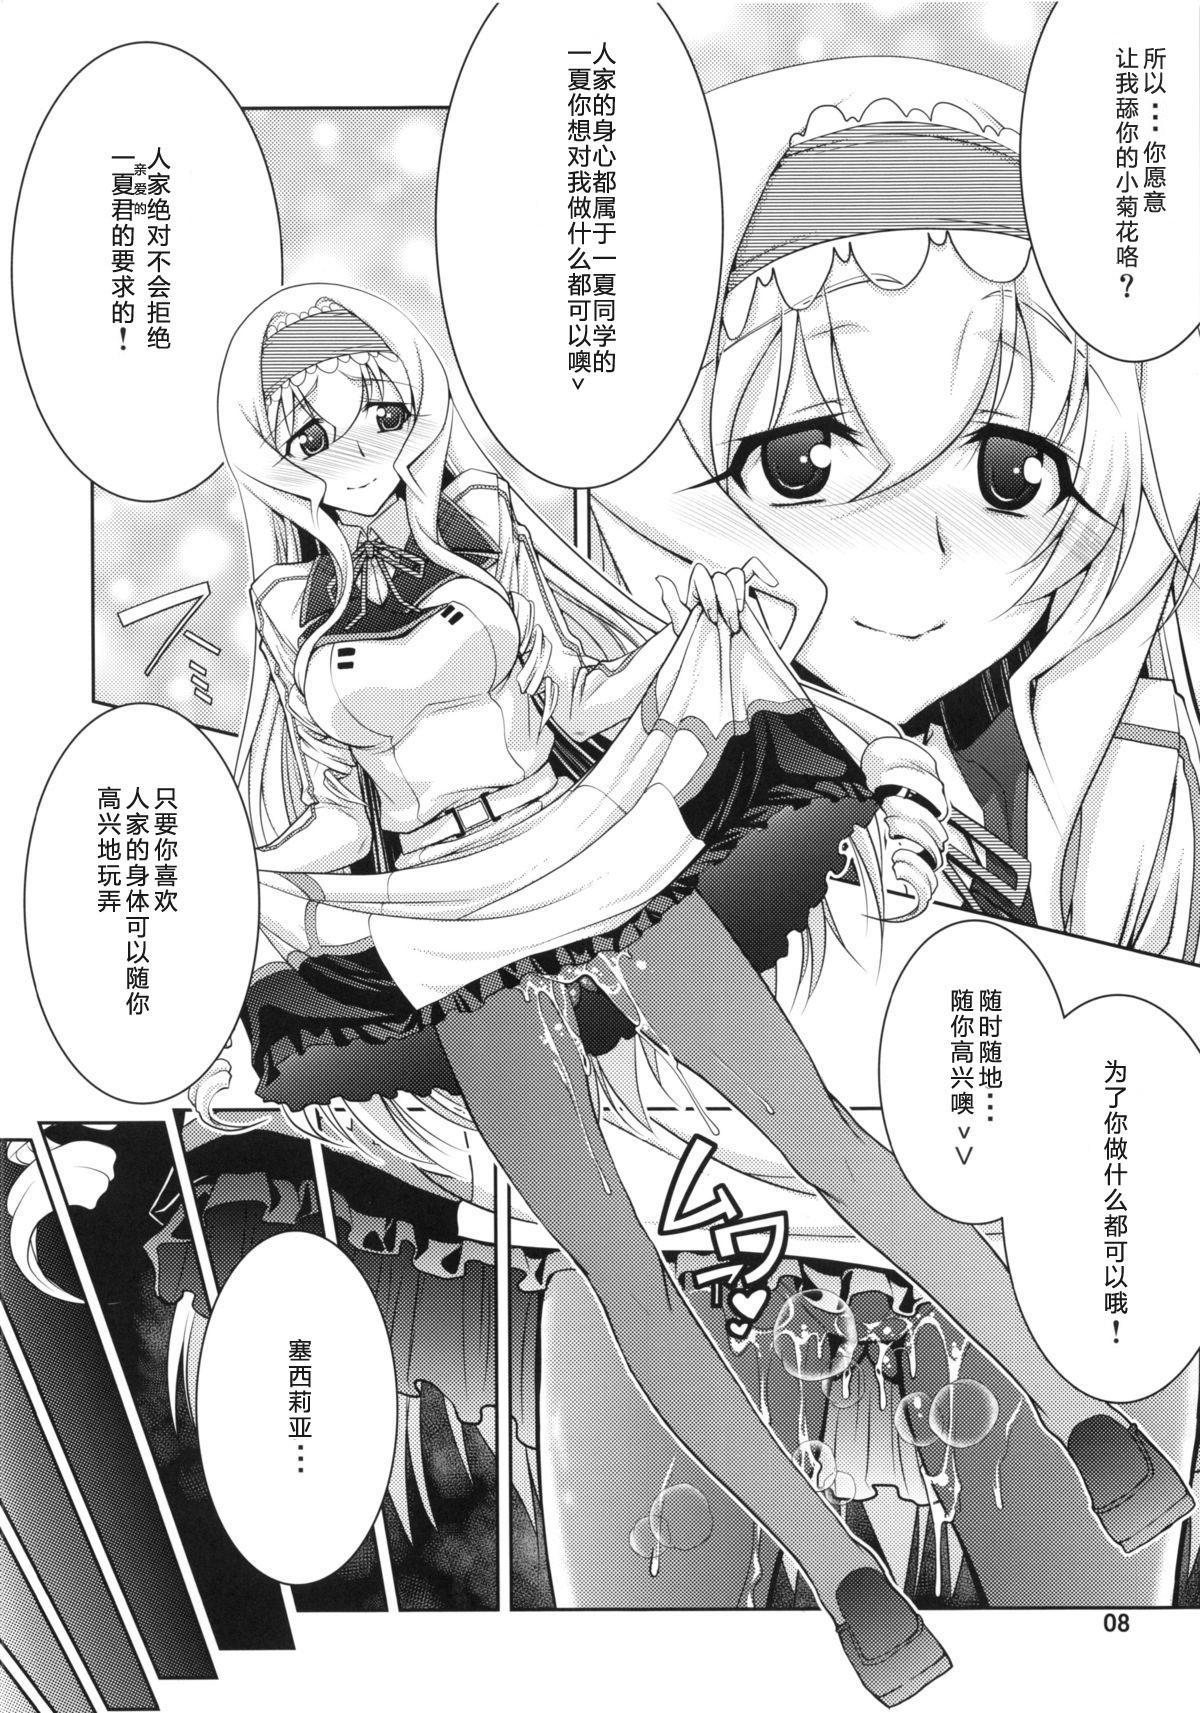 New IS 2 - Infinite stratos Culito - Page 7